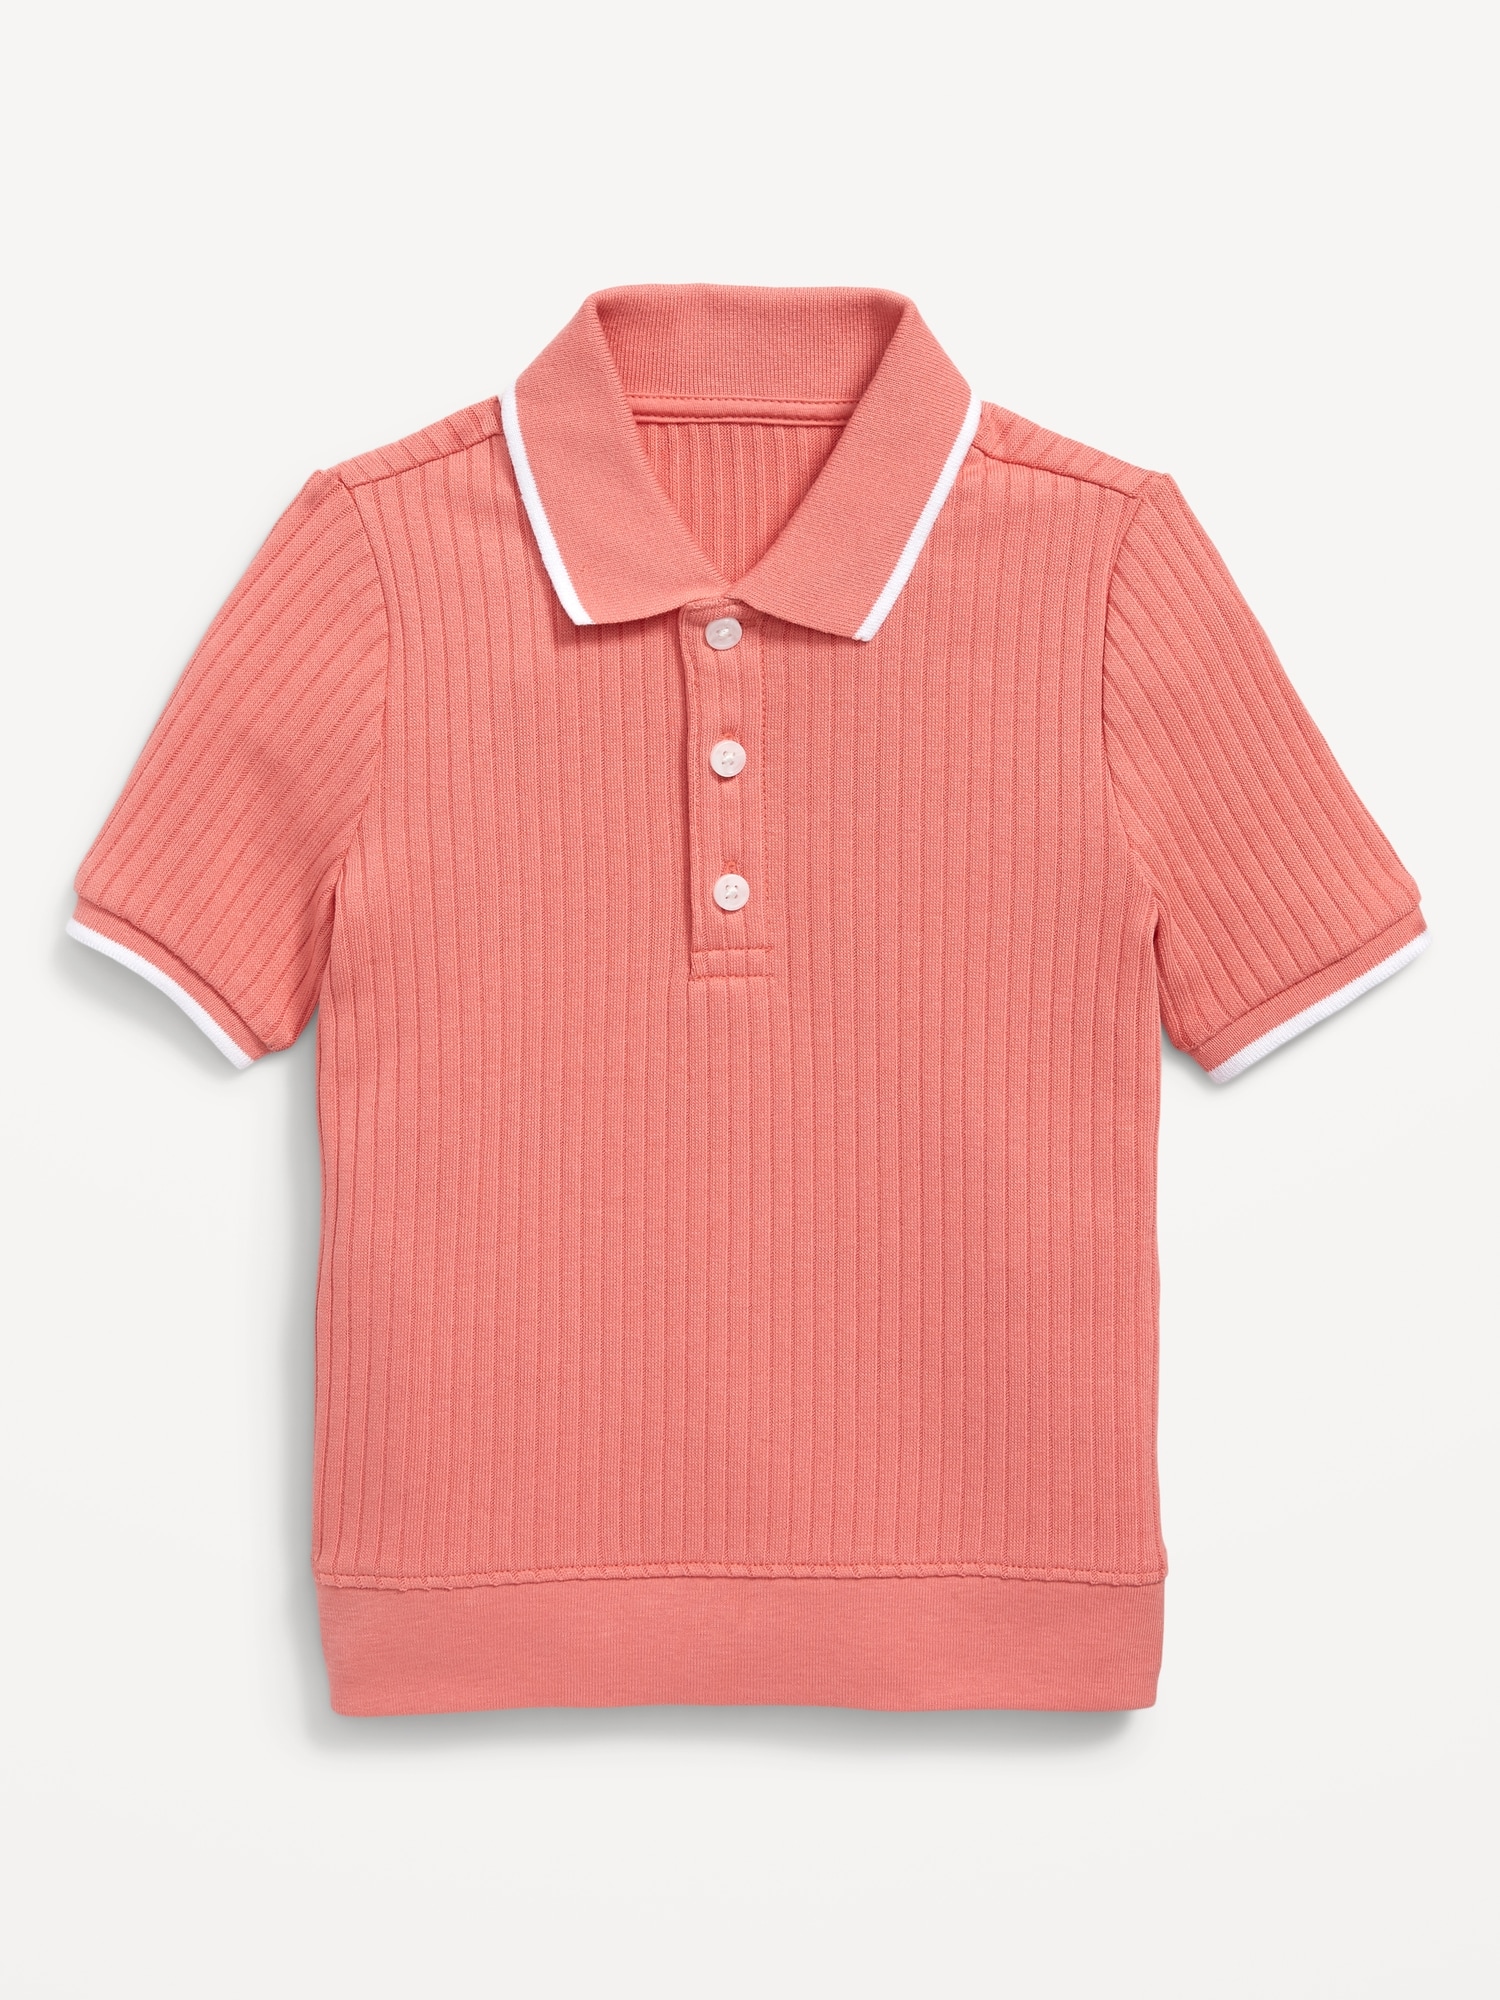 Unisex Rib-Knit Polo Shirt for Toddler | Old Navy